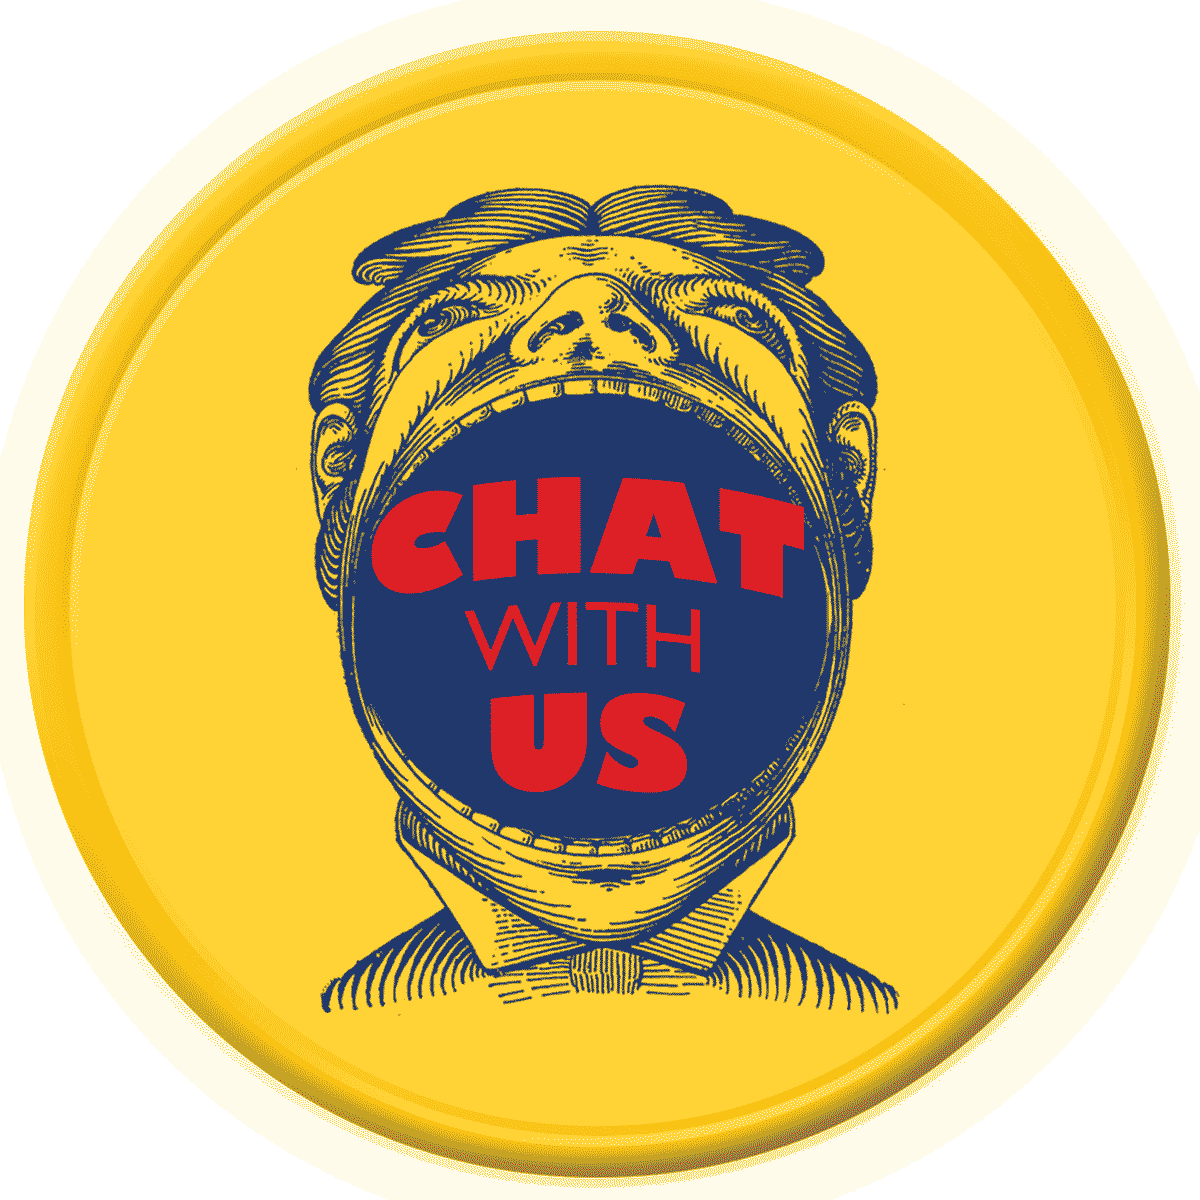 A chat with us button.